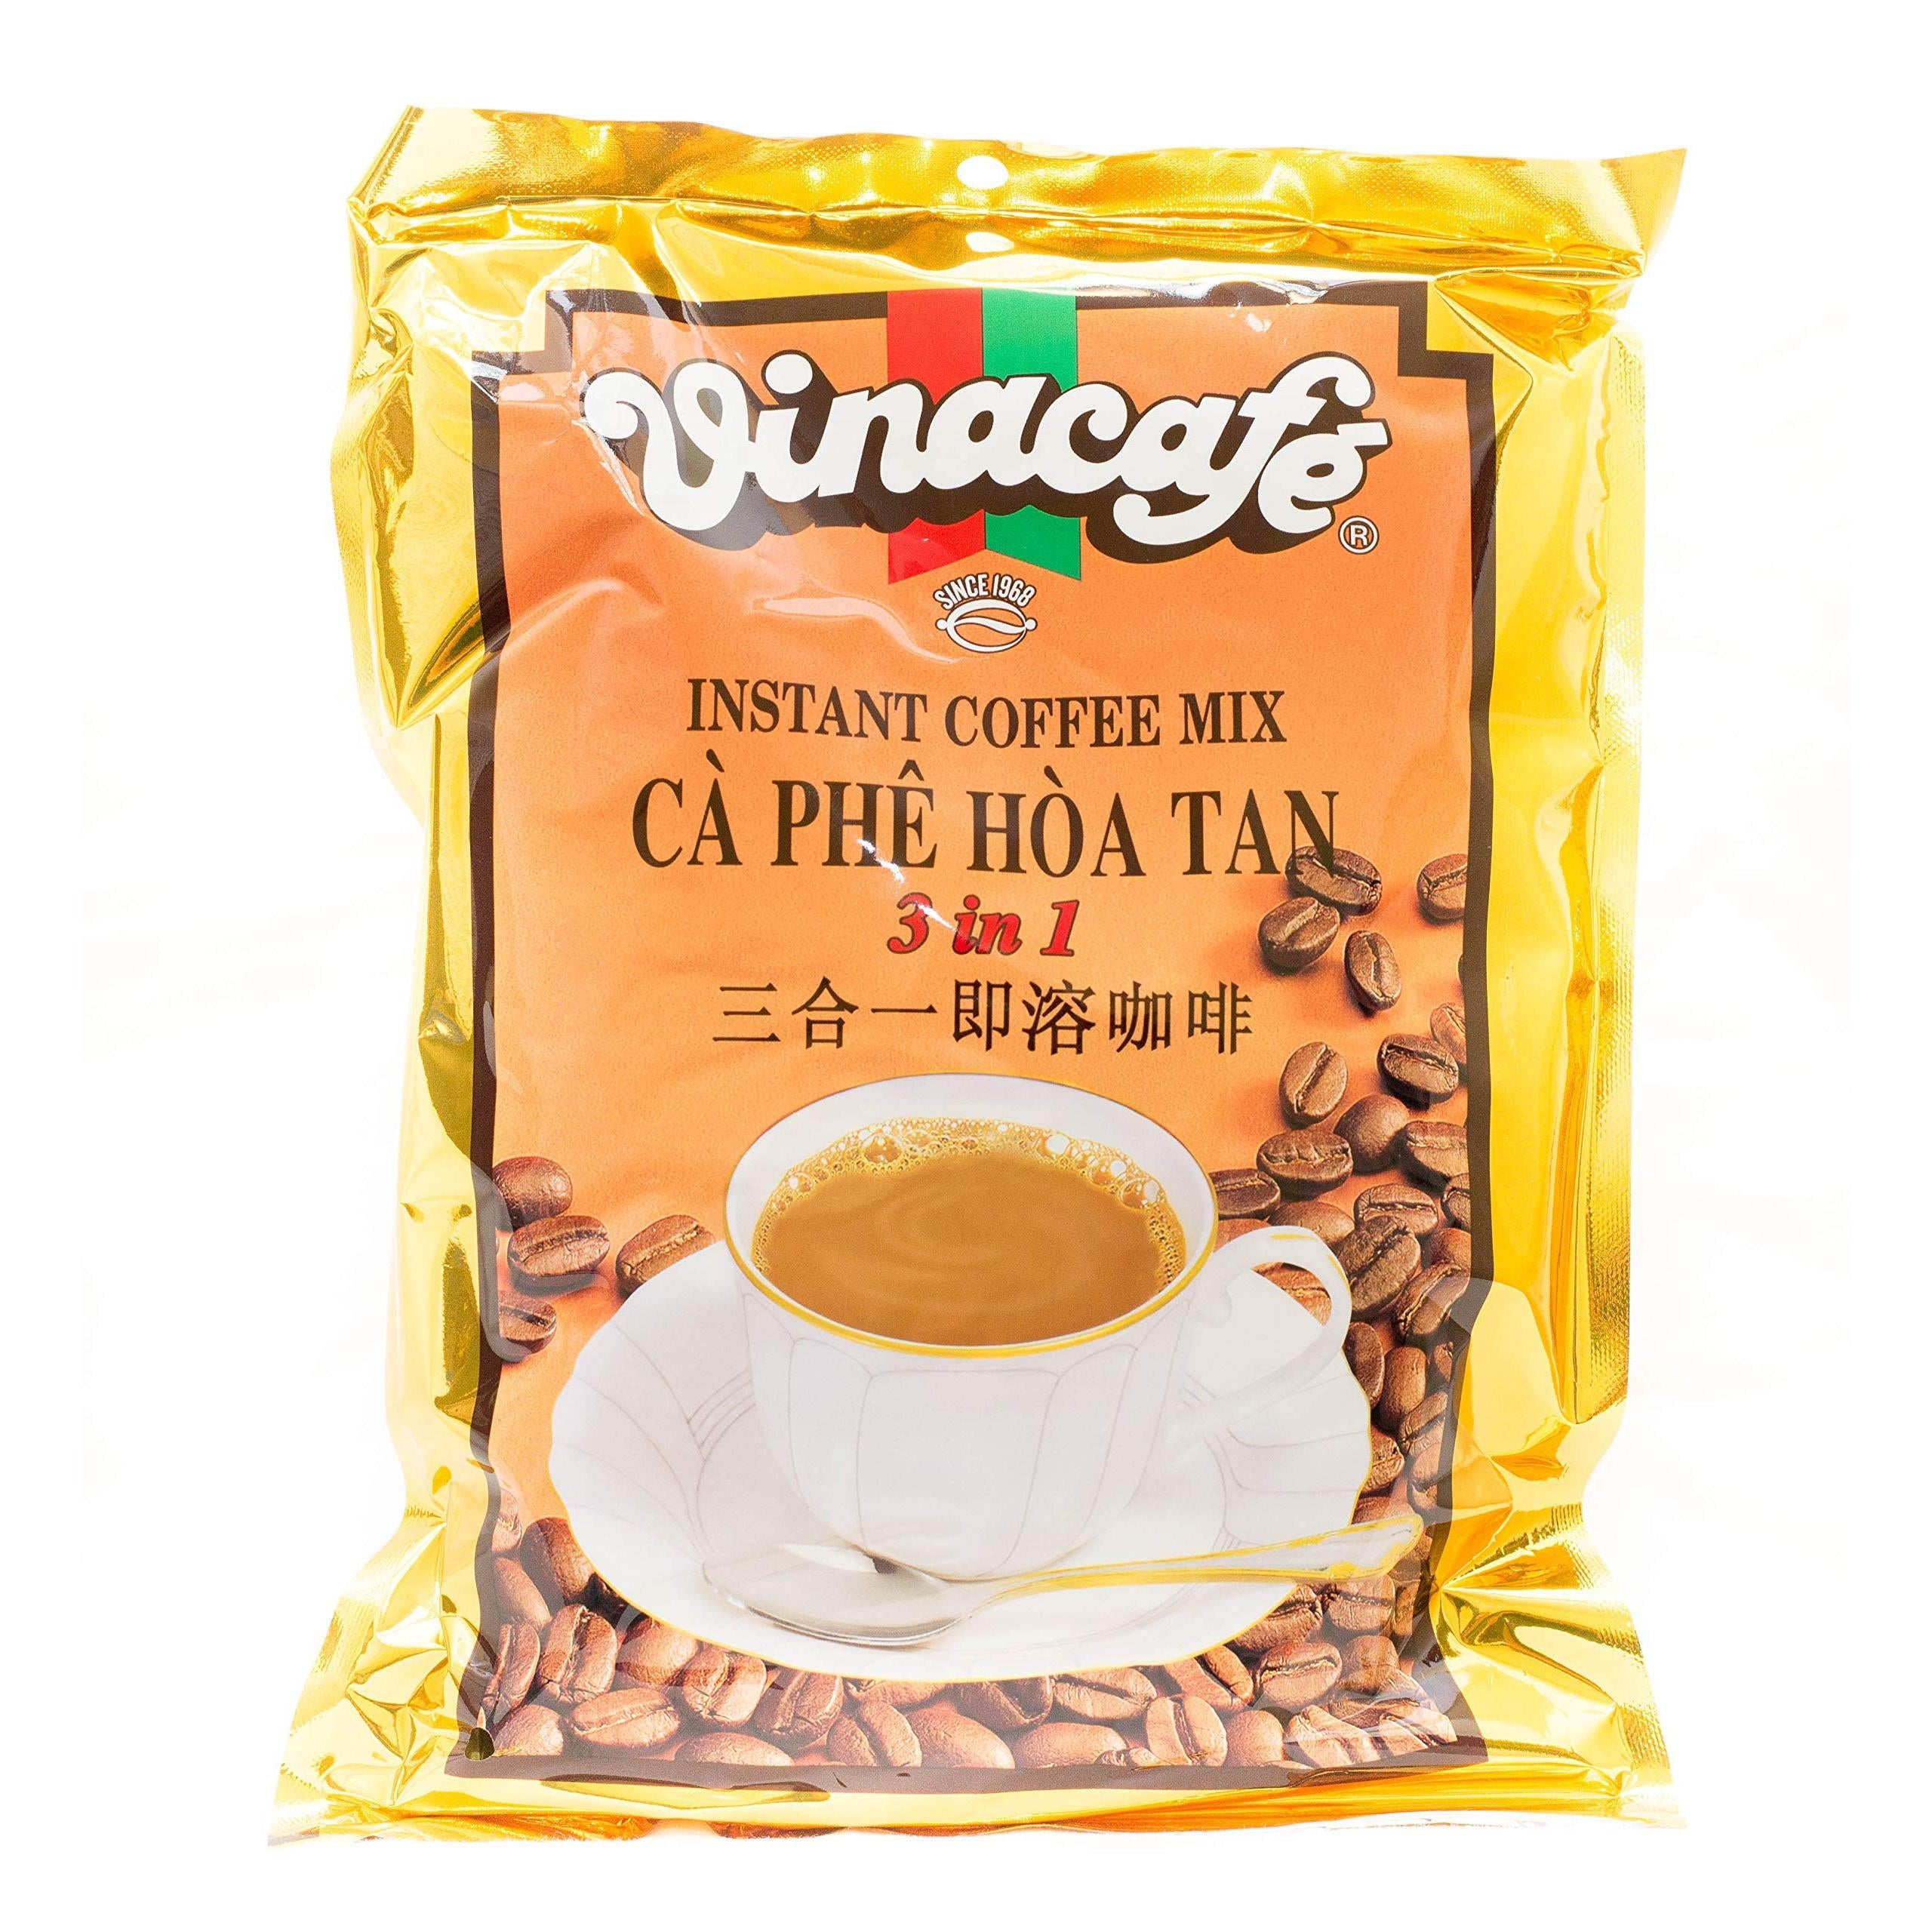 VINACAFE INSTANT COFFEE MIX 3 IN 1